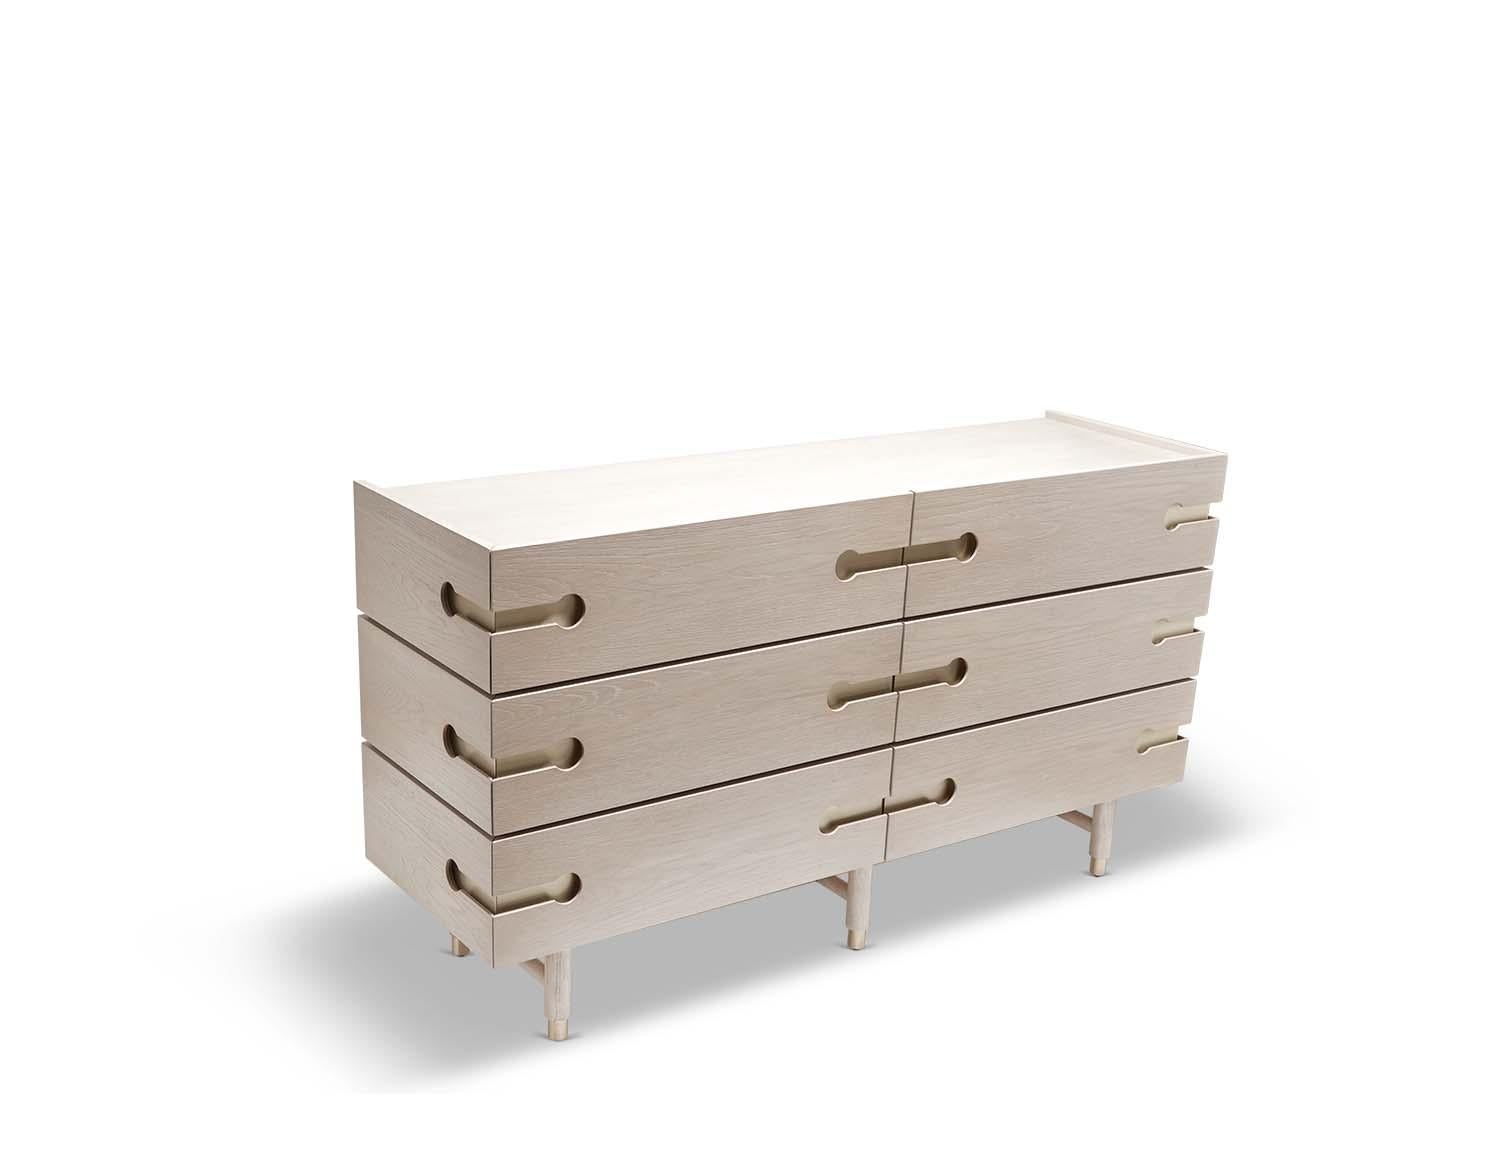 The 6-drawer Niguel dresser features 6 drawers, brass cap feet, and brass inlaid details.

The Lawson-Fenning Collection is designed and handmade in Los Angeles, California. Reach out to discover what options are currently in stock.
 